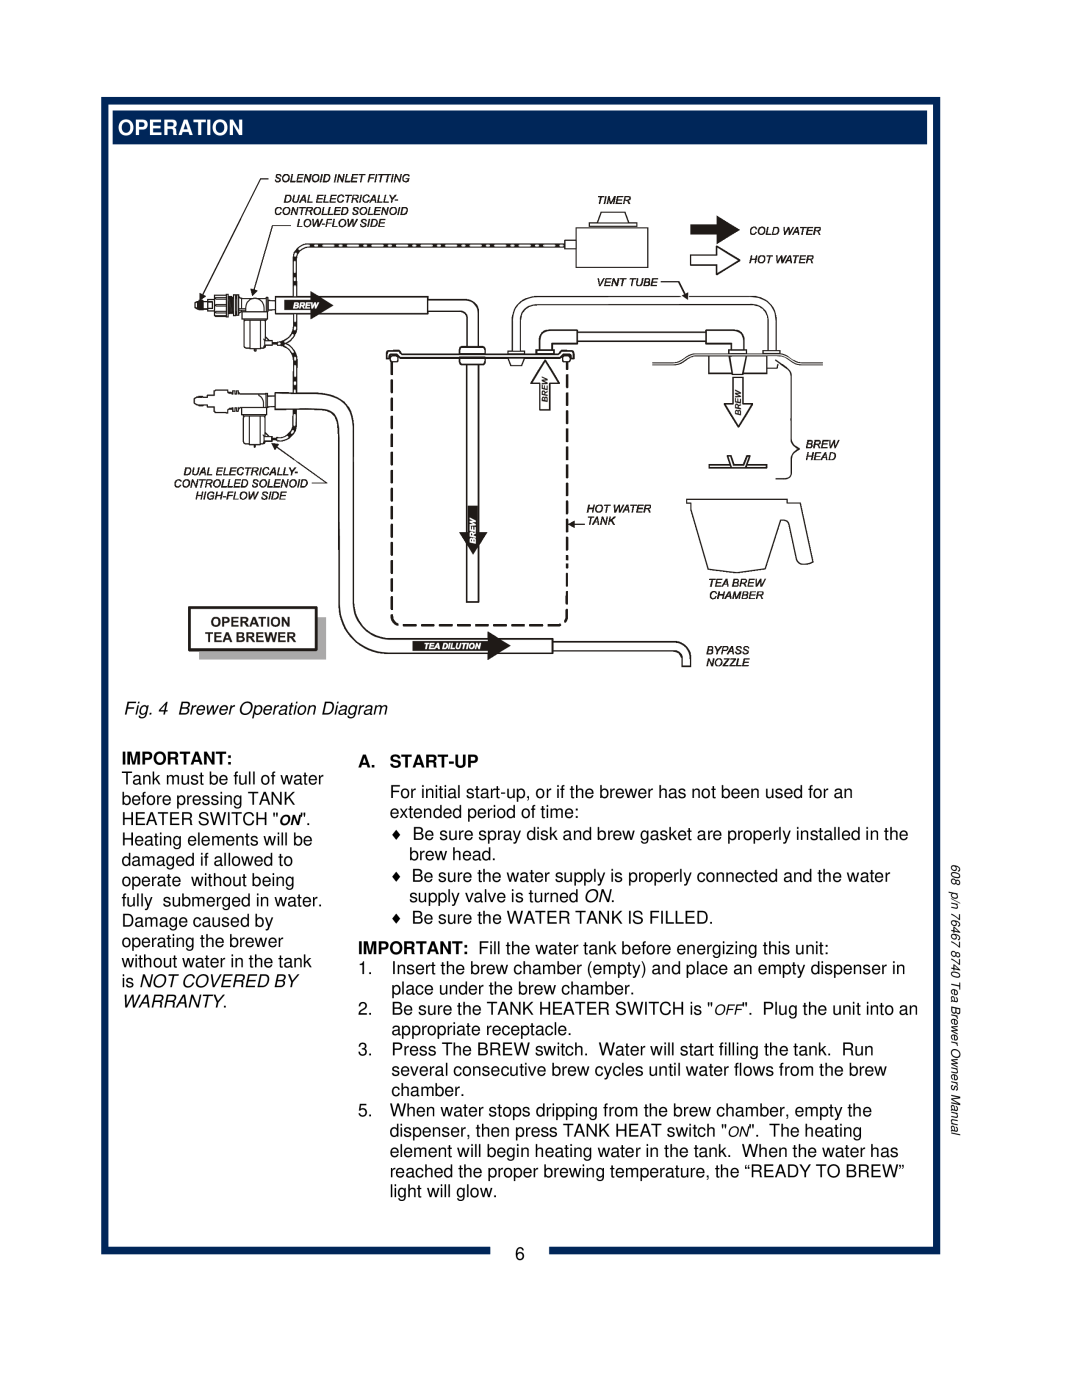 Bloomfield 8740 owner manual Brewer Operation Diagram, A.Start-Up 